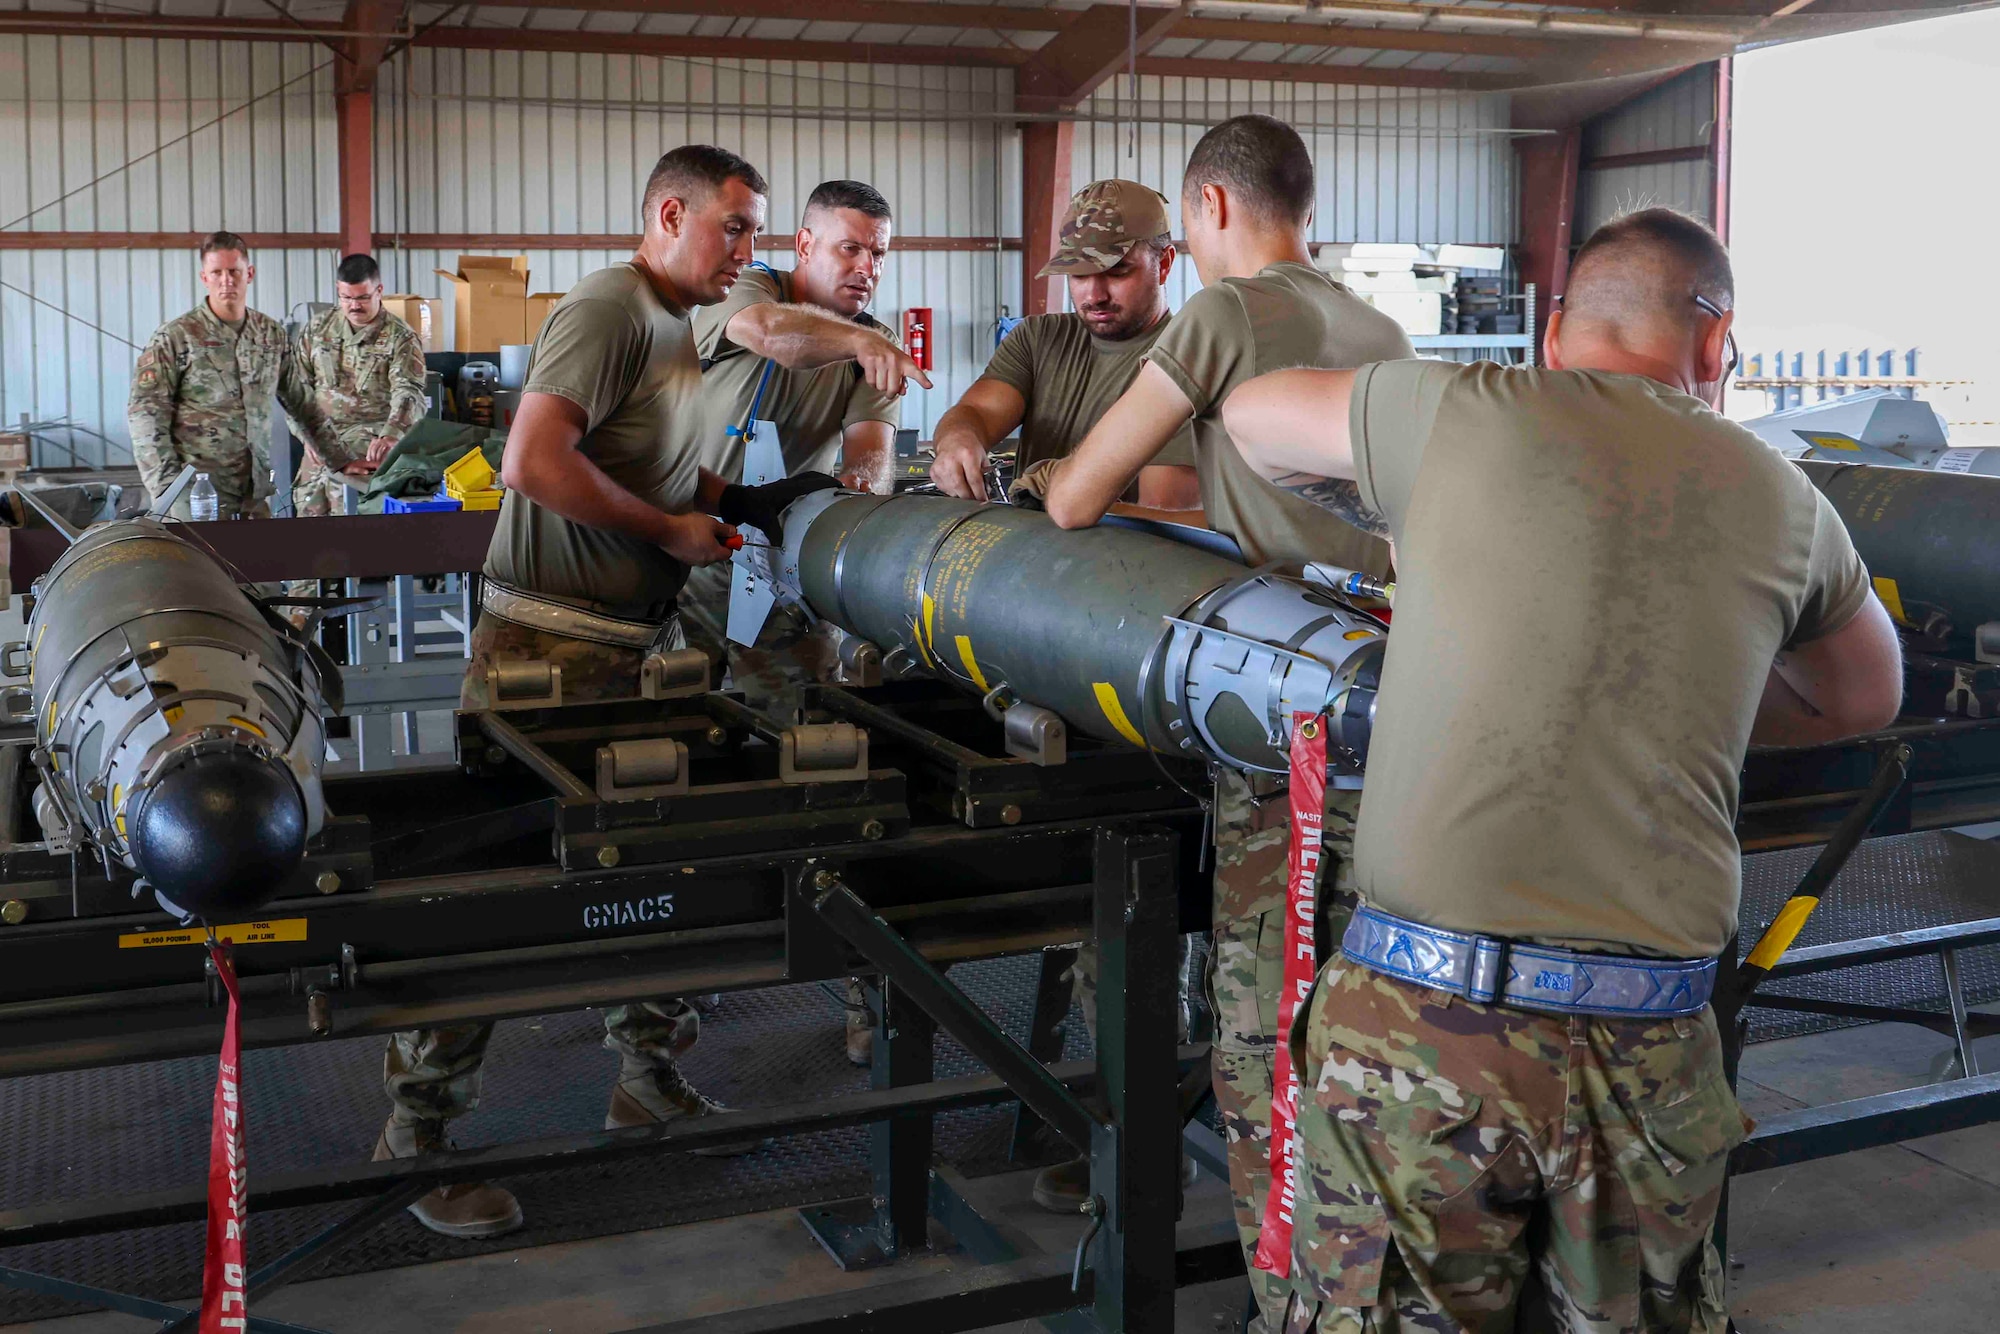 U.S. Air Force Airmen from Whiteman Air Force Base, Missouri, 509th Munitions Squadron, build GBU-54 munitions using the munitions assembly conveyer during the Air Force Combat Operations Competition, Aug. 23, 2023, at Beale AFB, California.